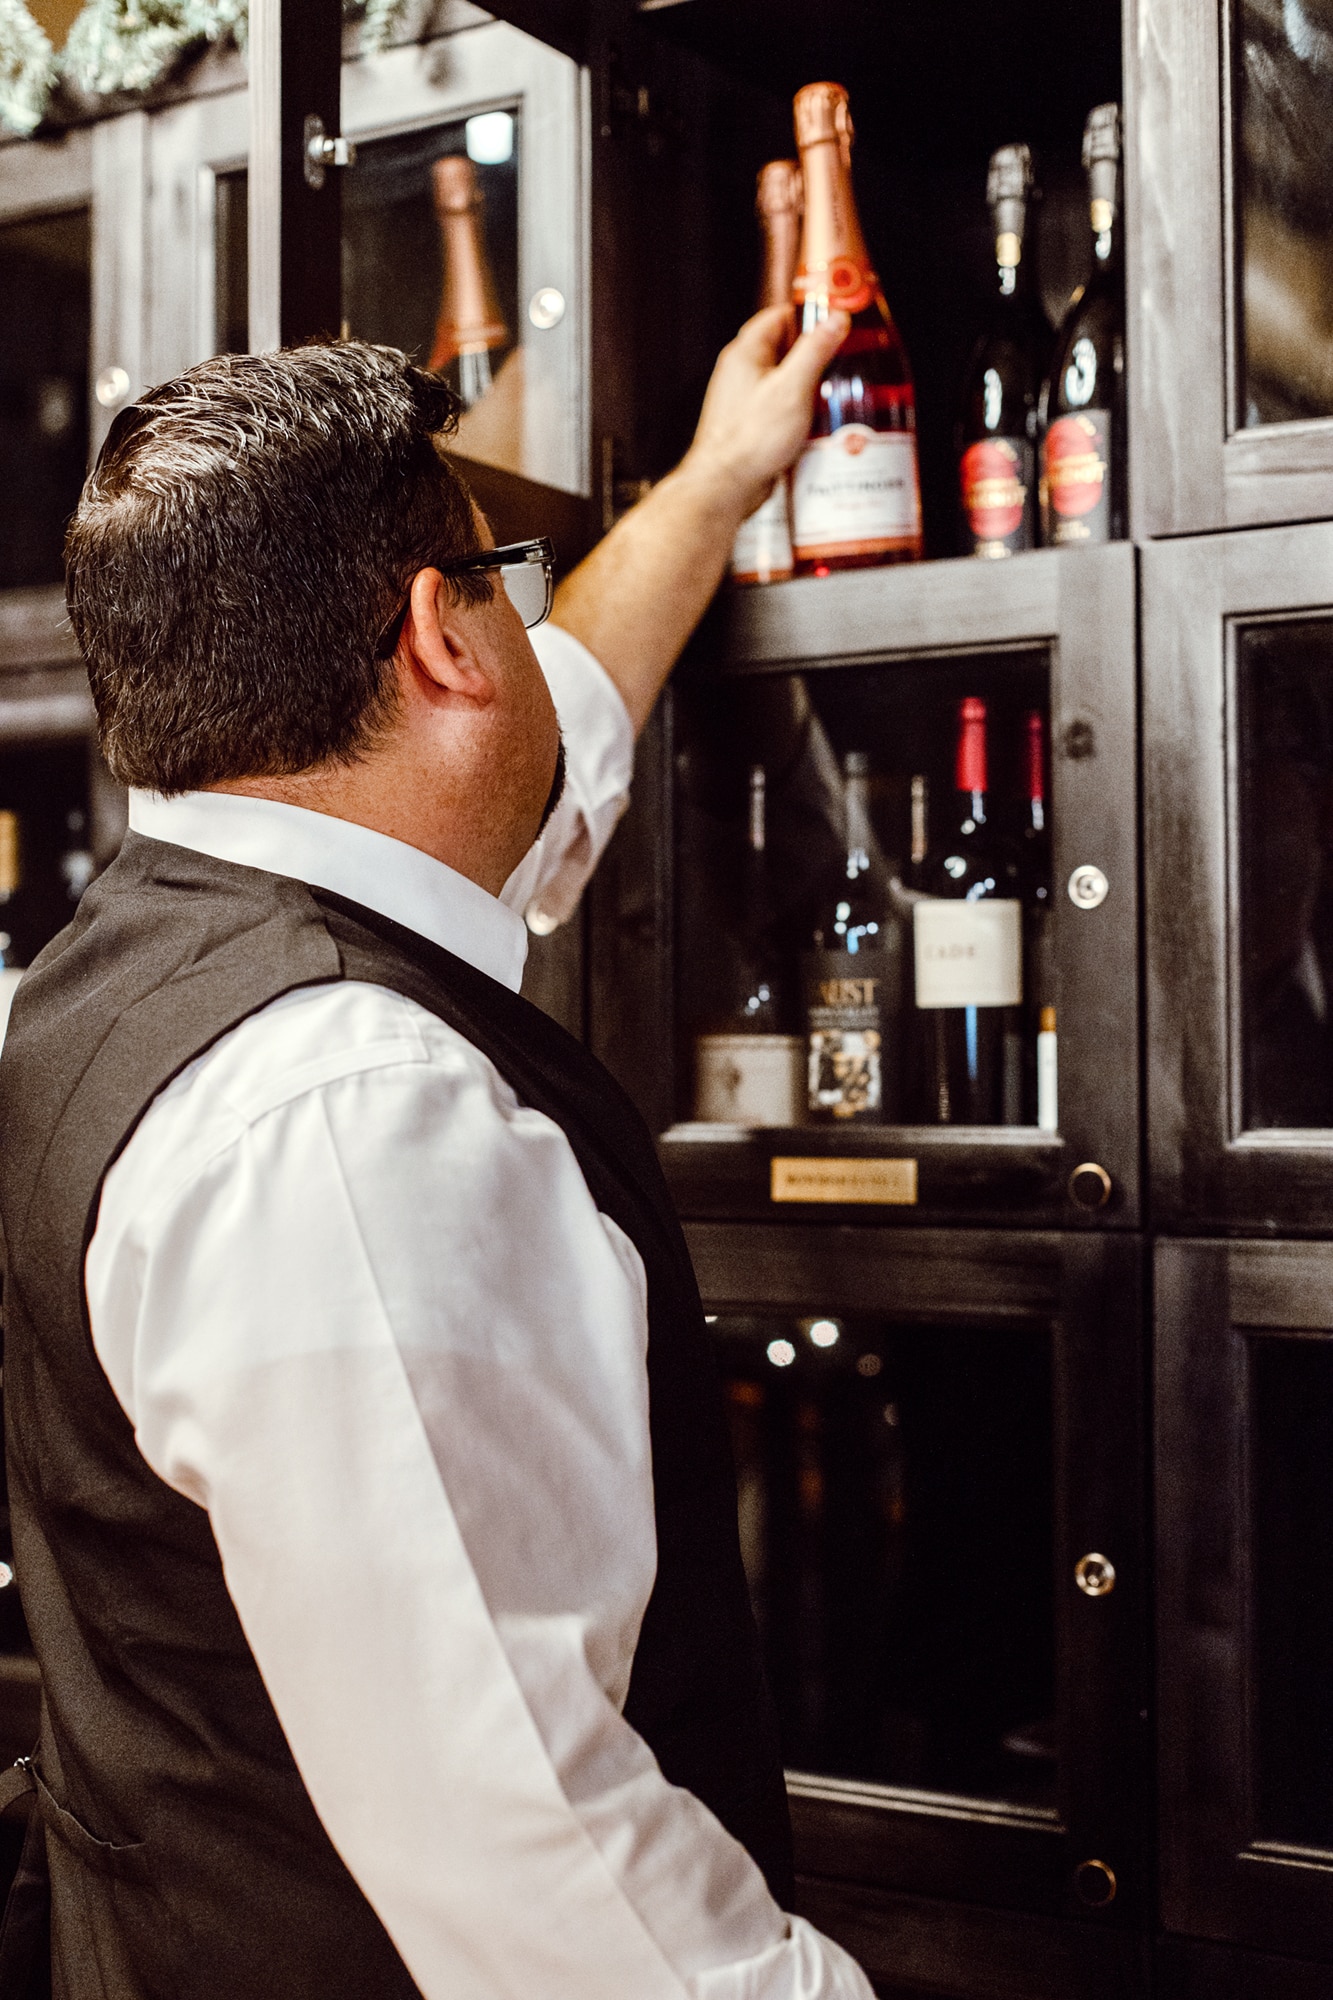 Bowdie's staff selecting wine from a cabinet